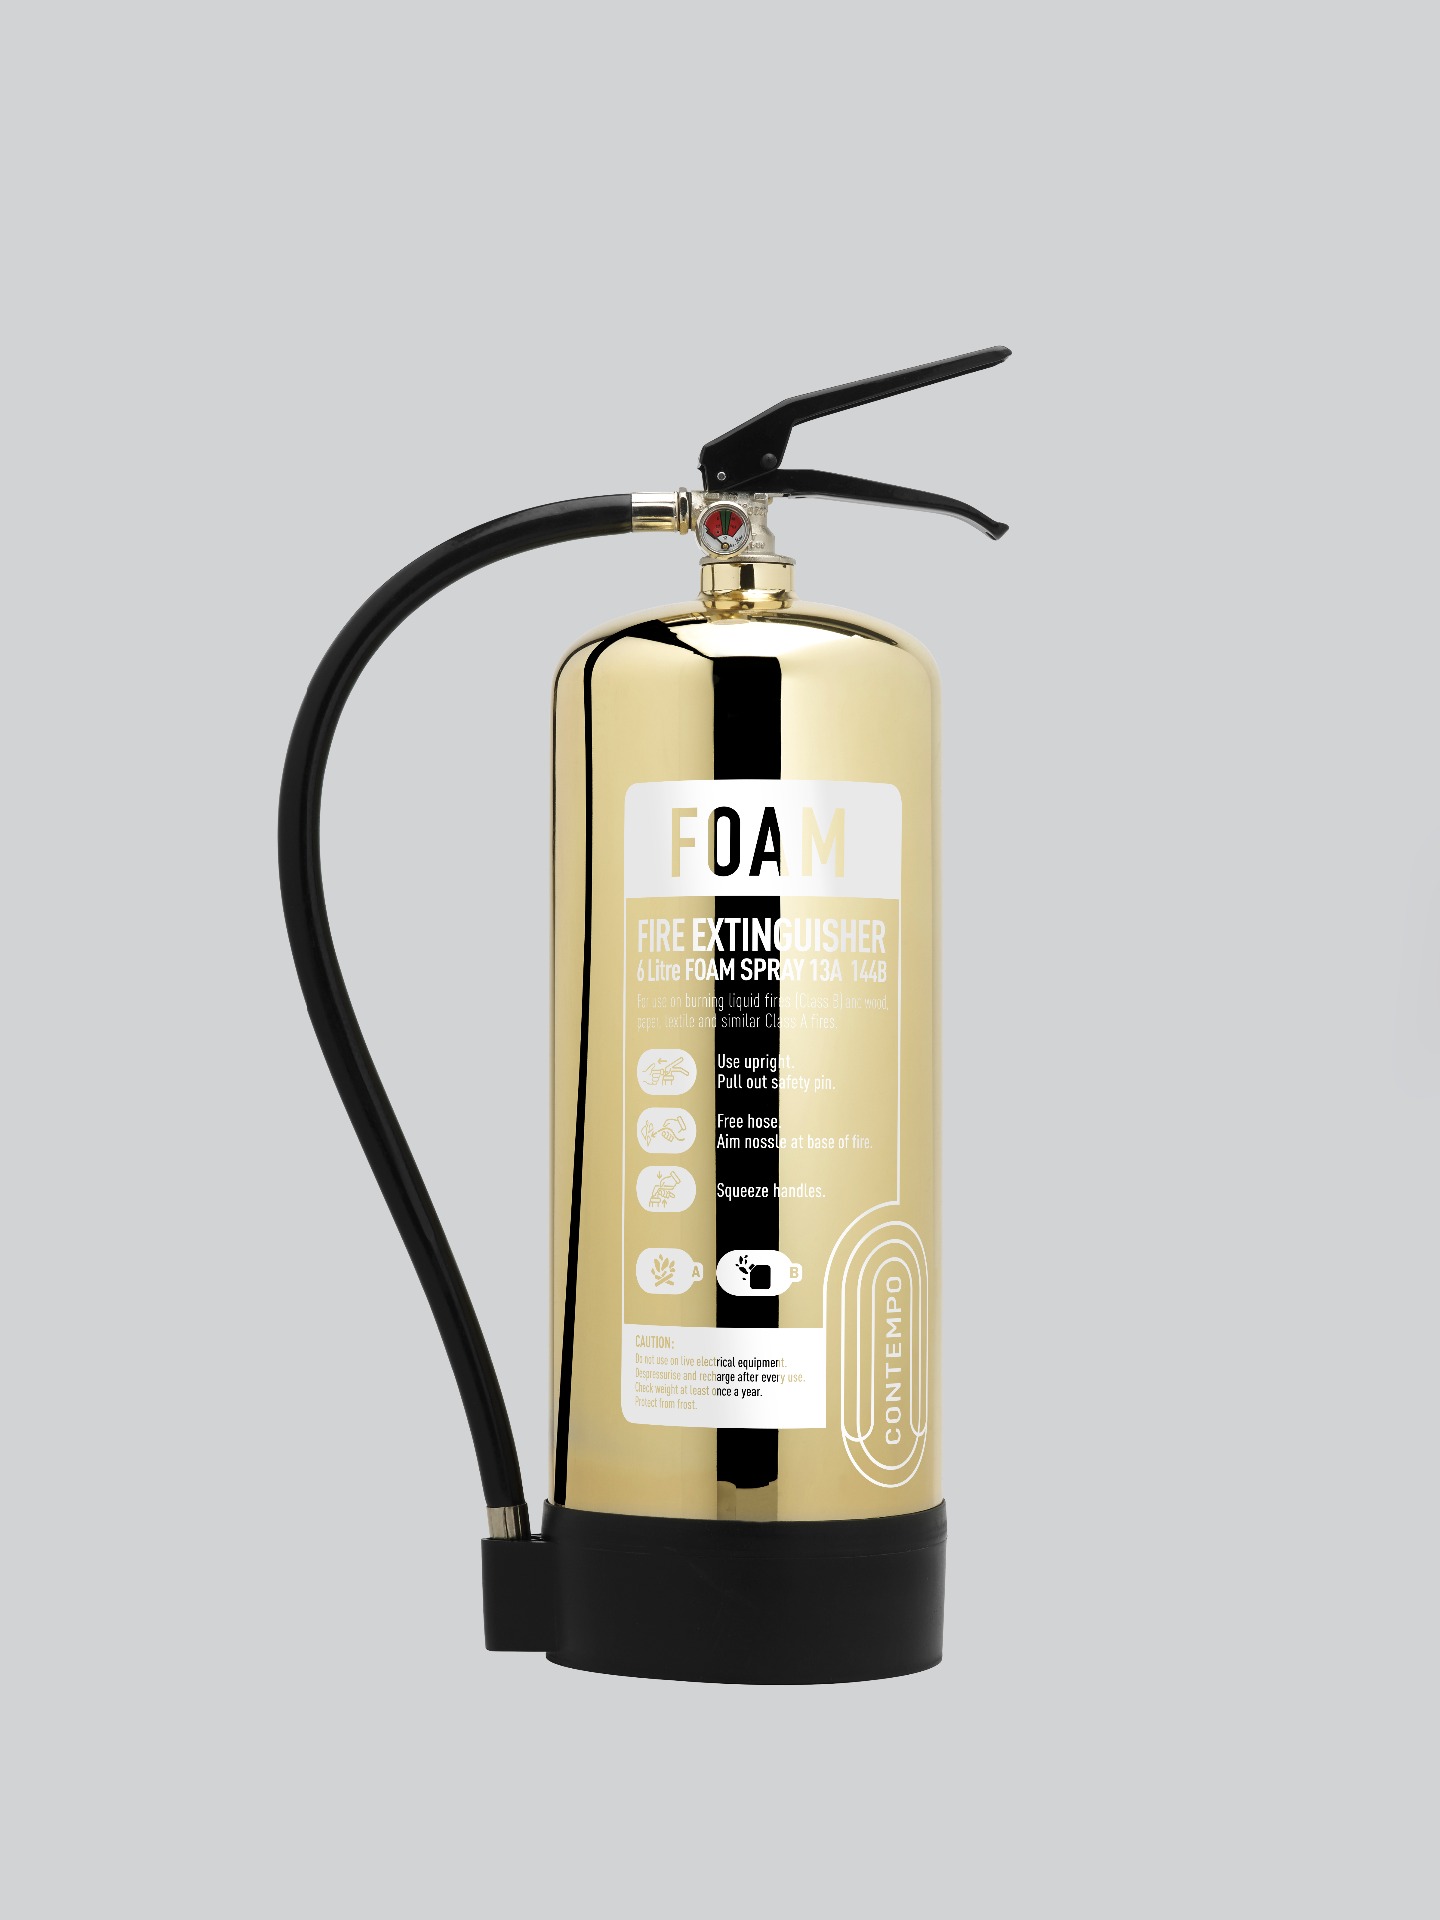 Midland Fire - First Class Range - 6 Litre Afff (Foam Spray) with a golden shine finish